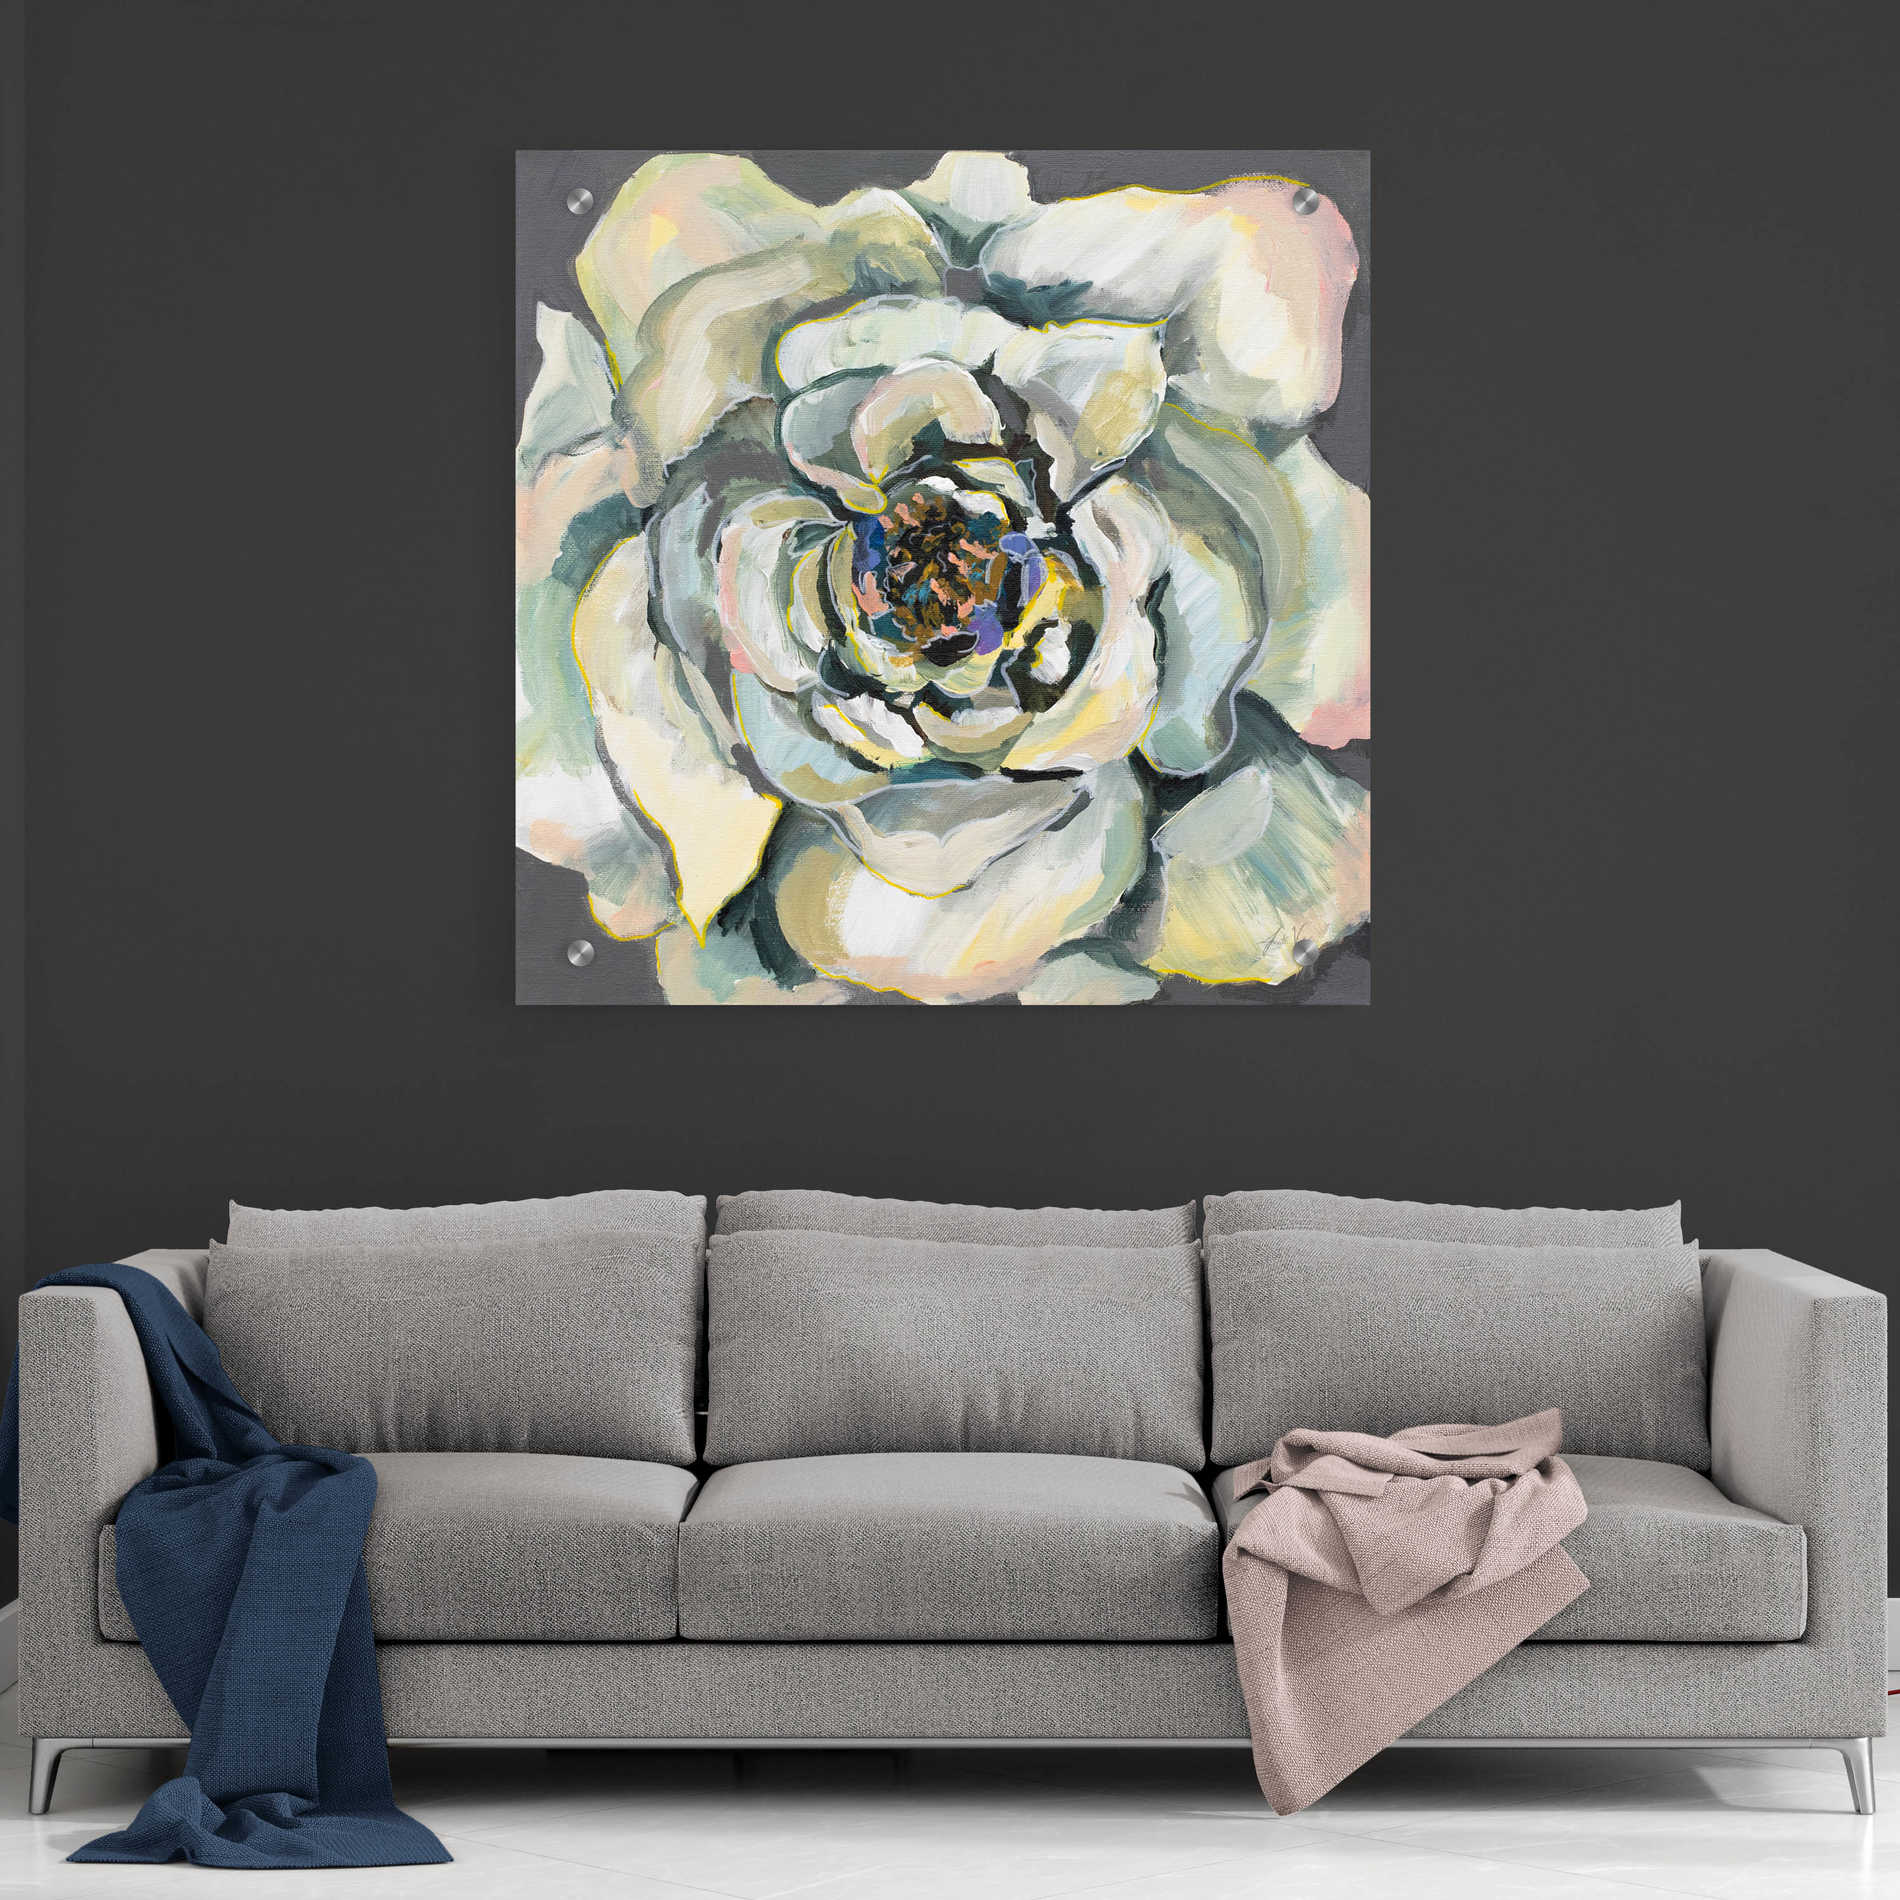 Epic Art 'Bloom I' by Jeanette Vertentes, Acrylic Glass Wall Art,36x36